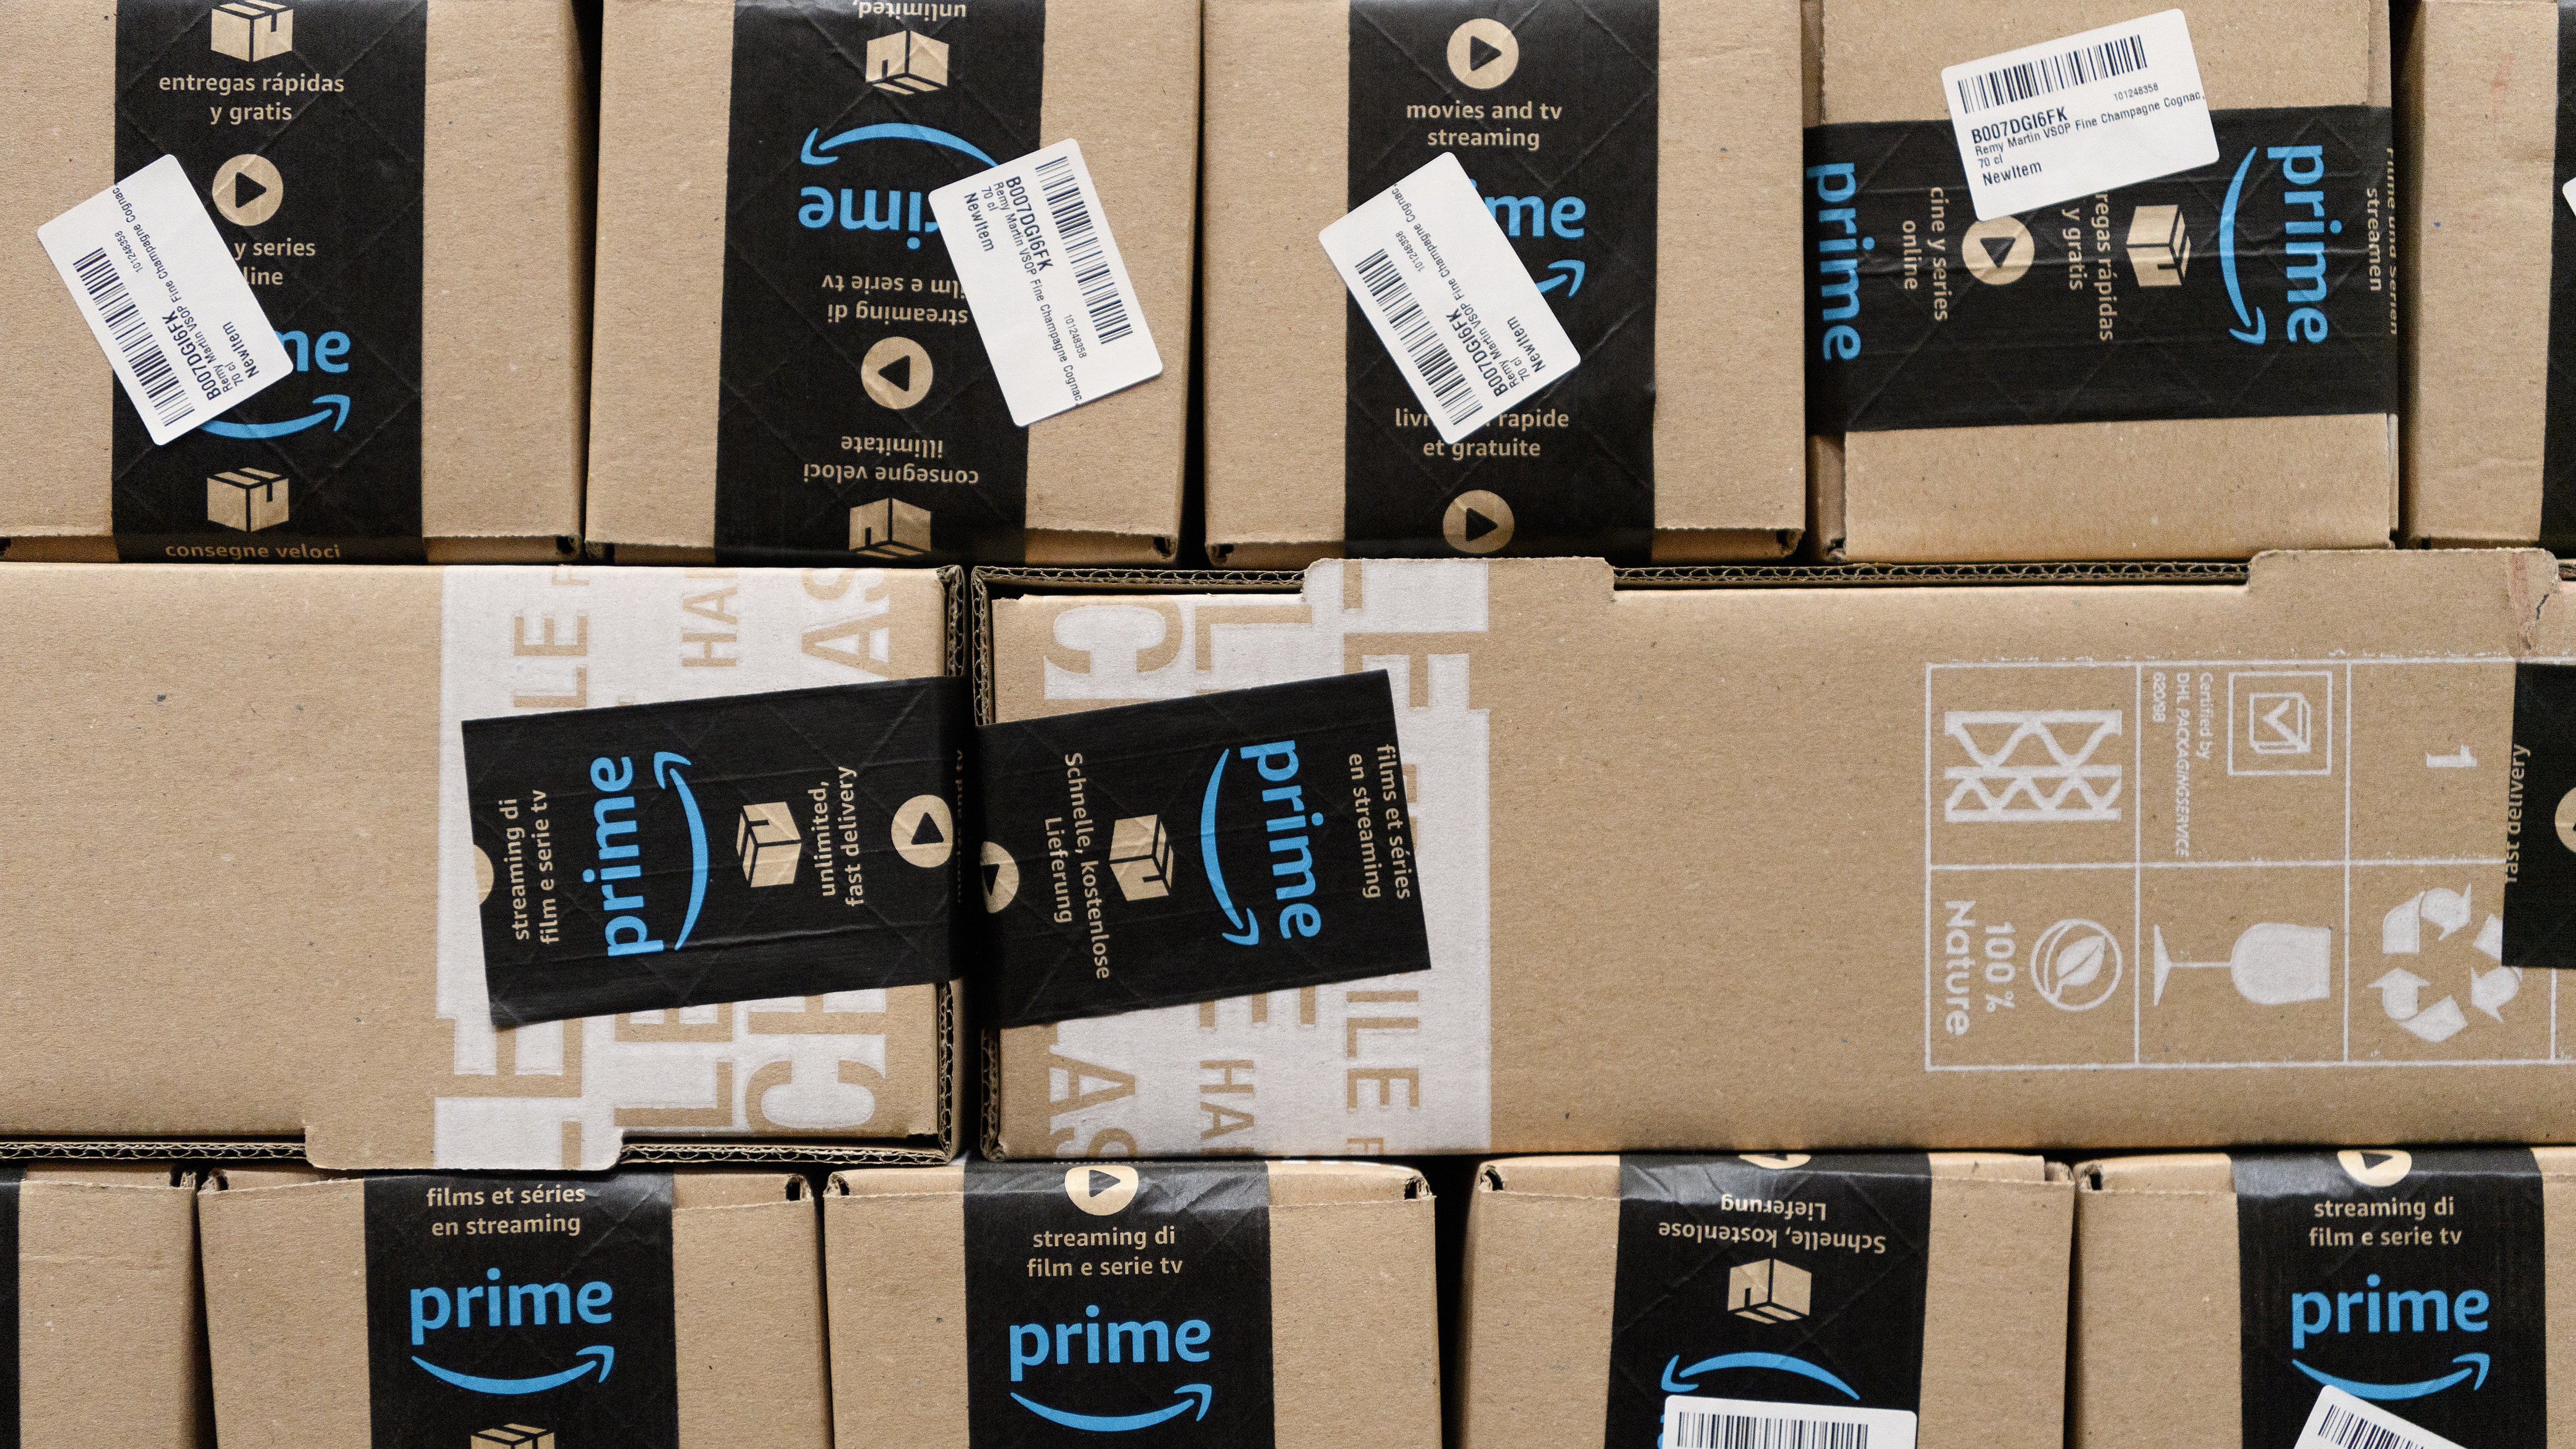 How To Ensure Your Amazon Purchase Isn’t Dangerous